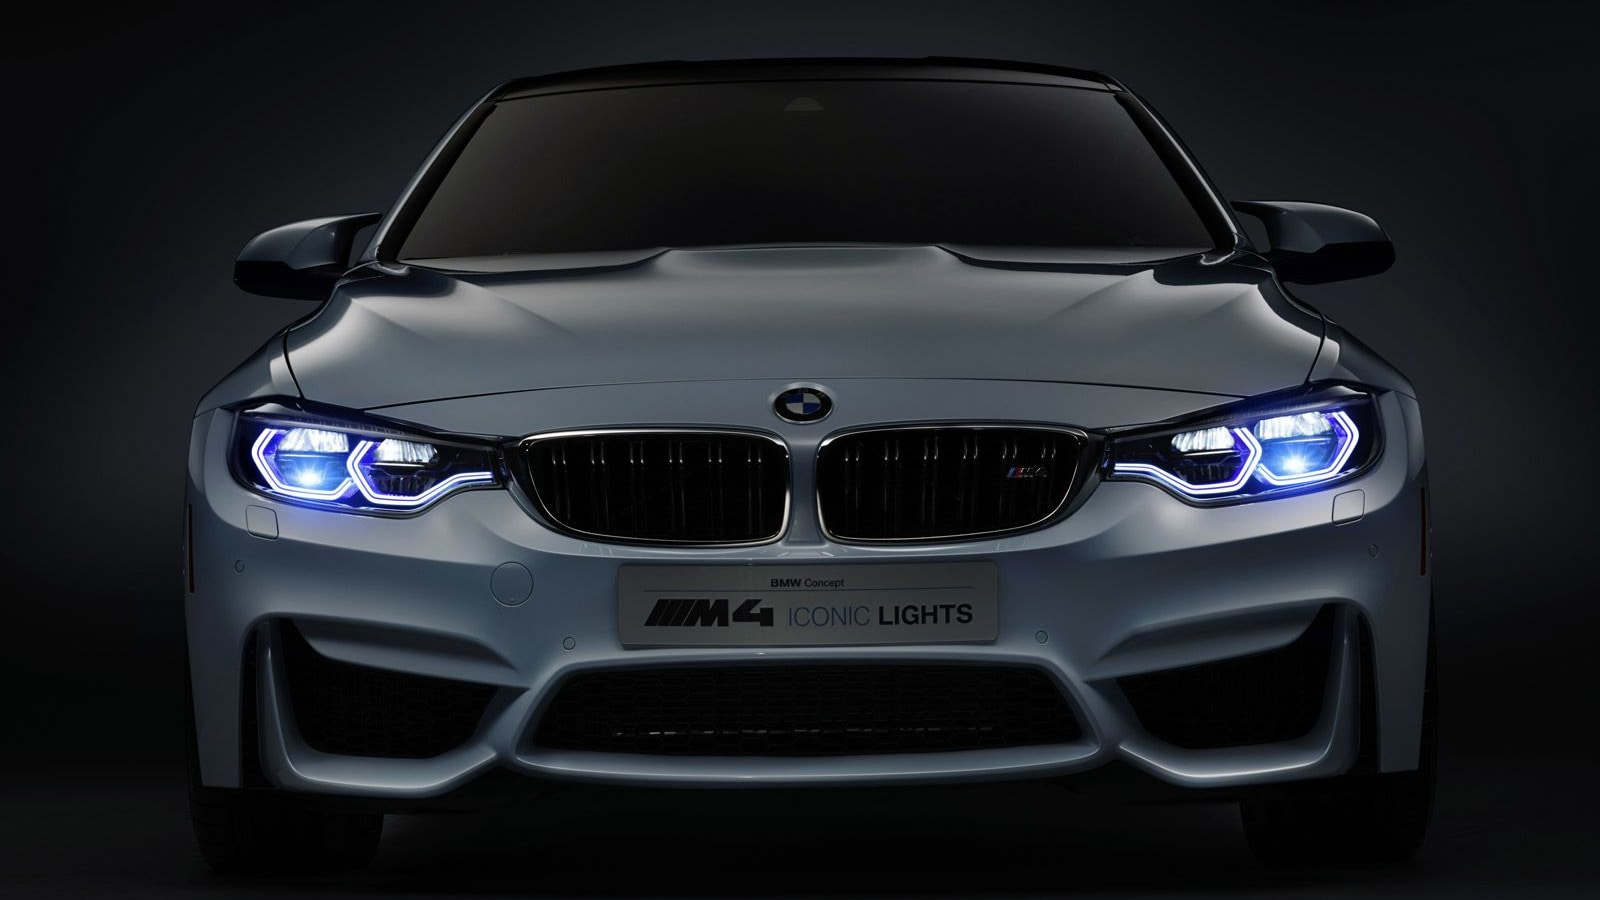 BMW M4 Concept Iconic Lights, 2015 Consumer Electronics Show